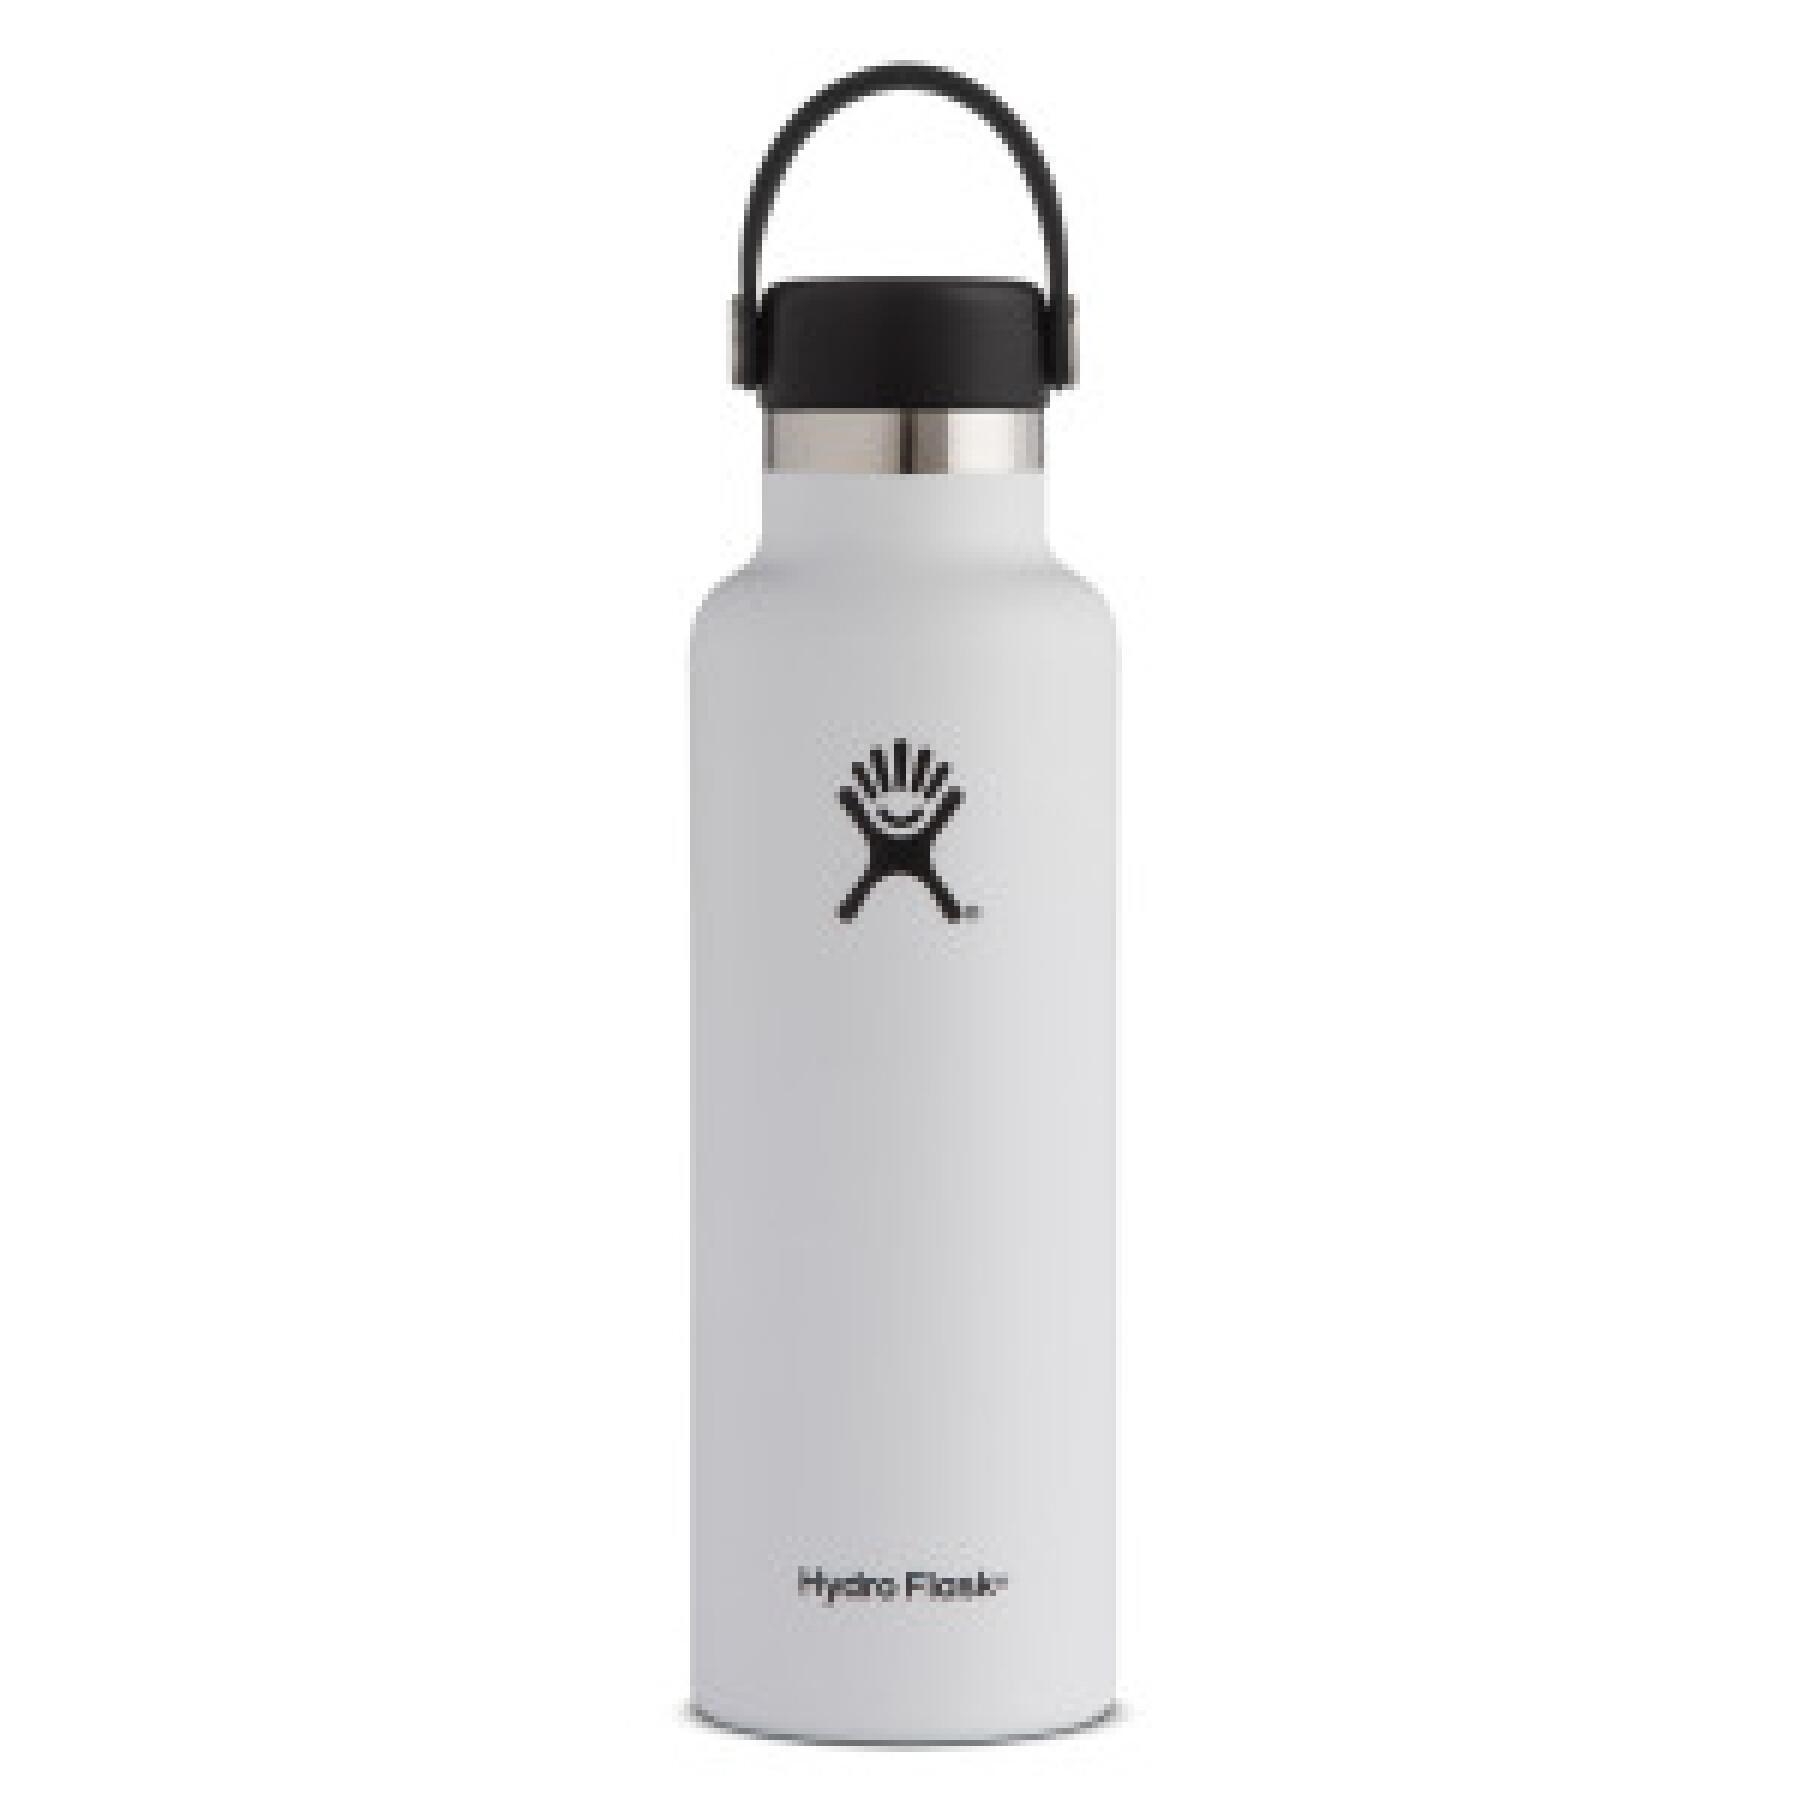 Standardowa butelka Hydro Flask mouth with stainless steel cap 21 oz